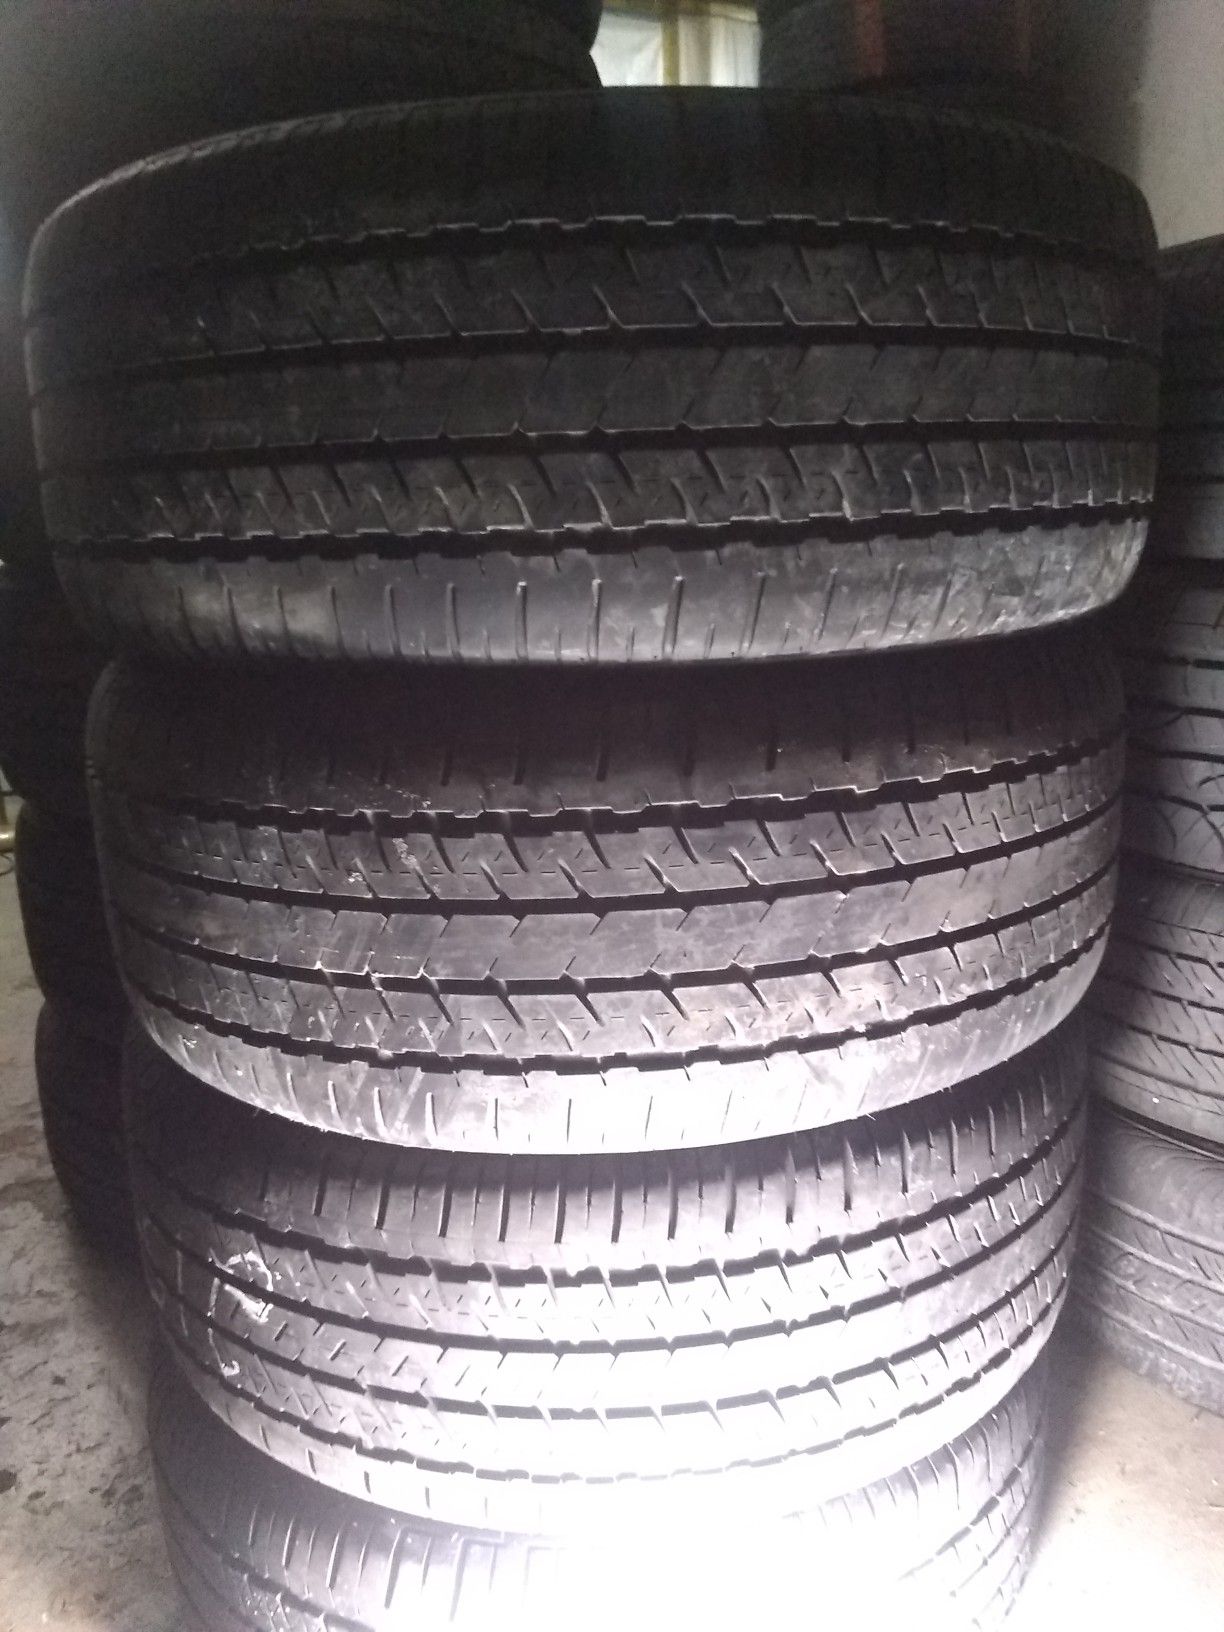 All sizes high tread used tires